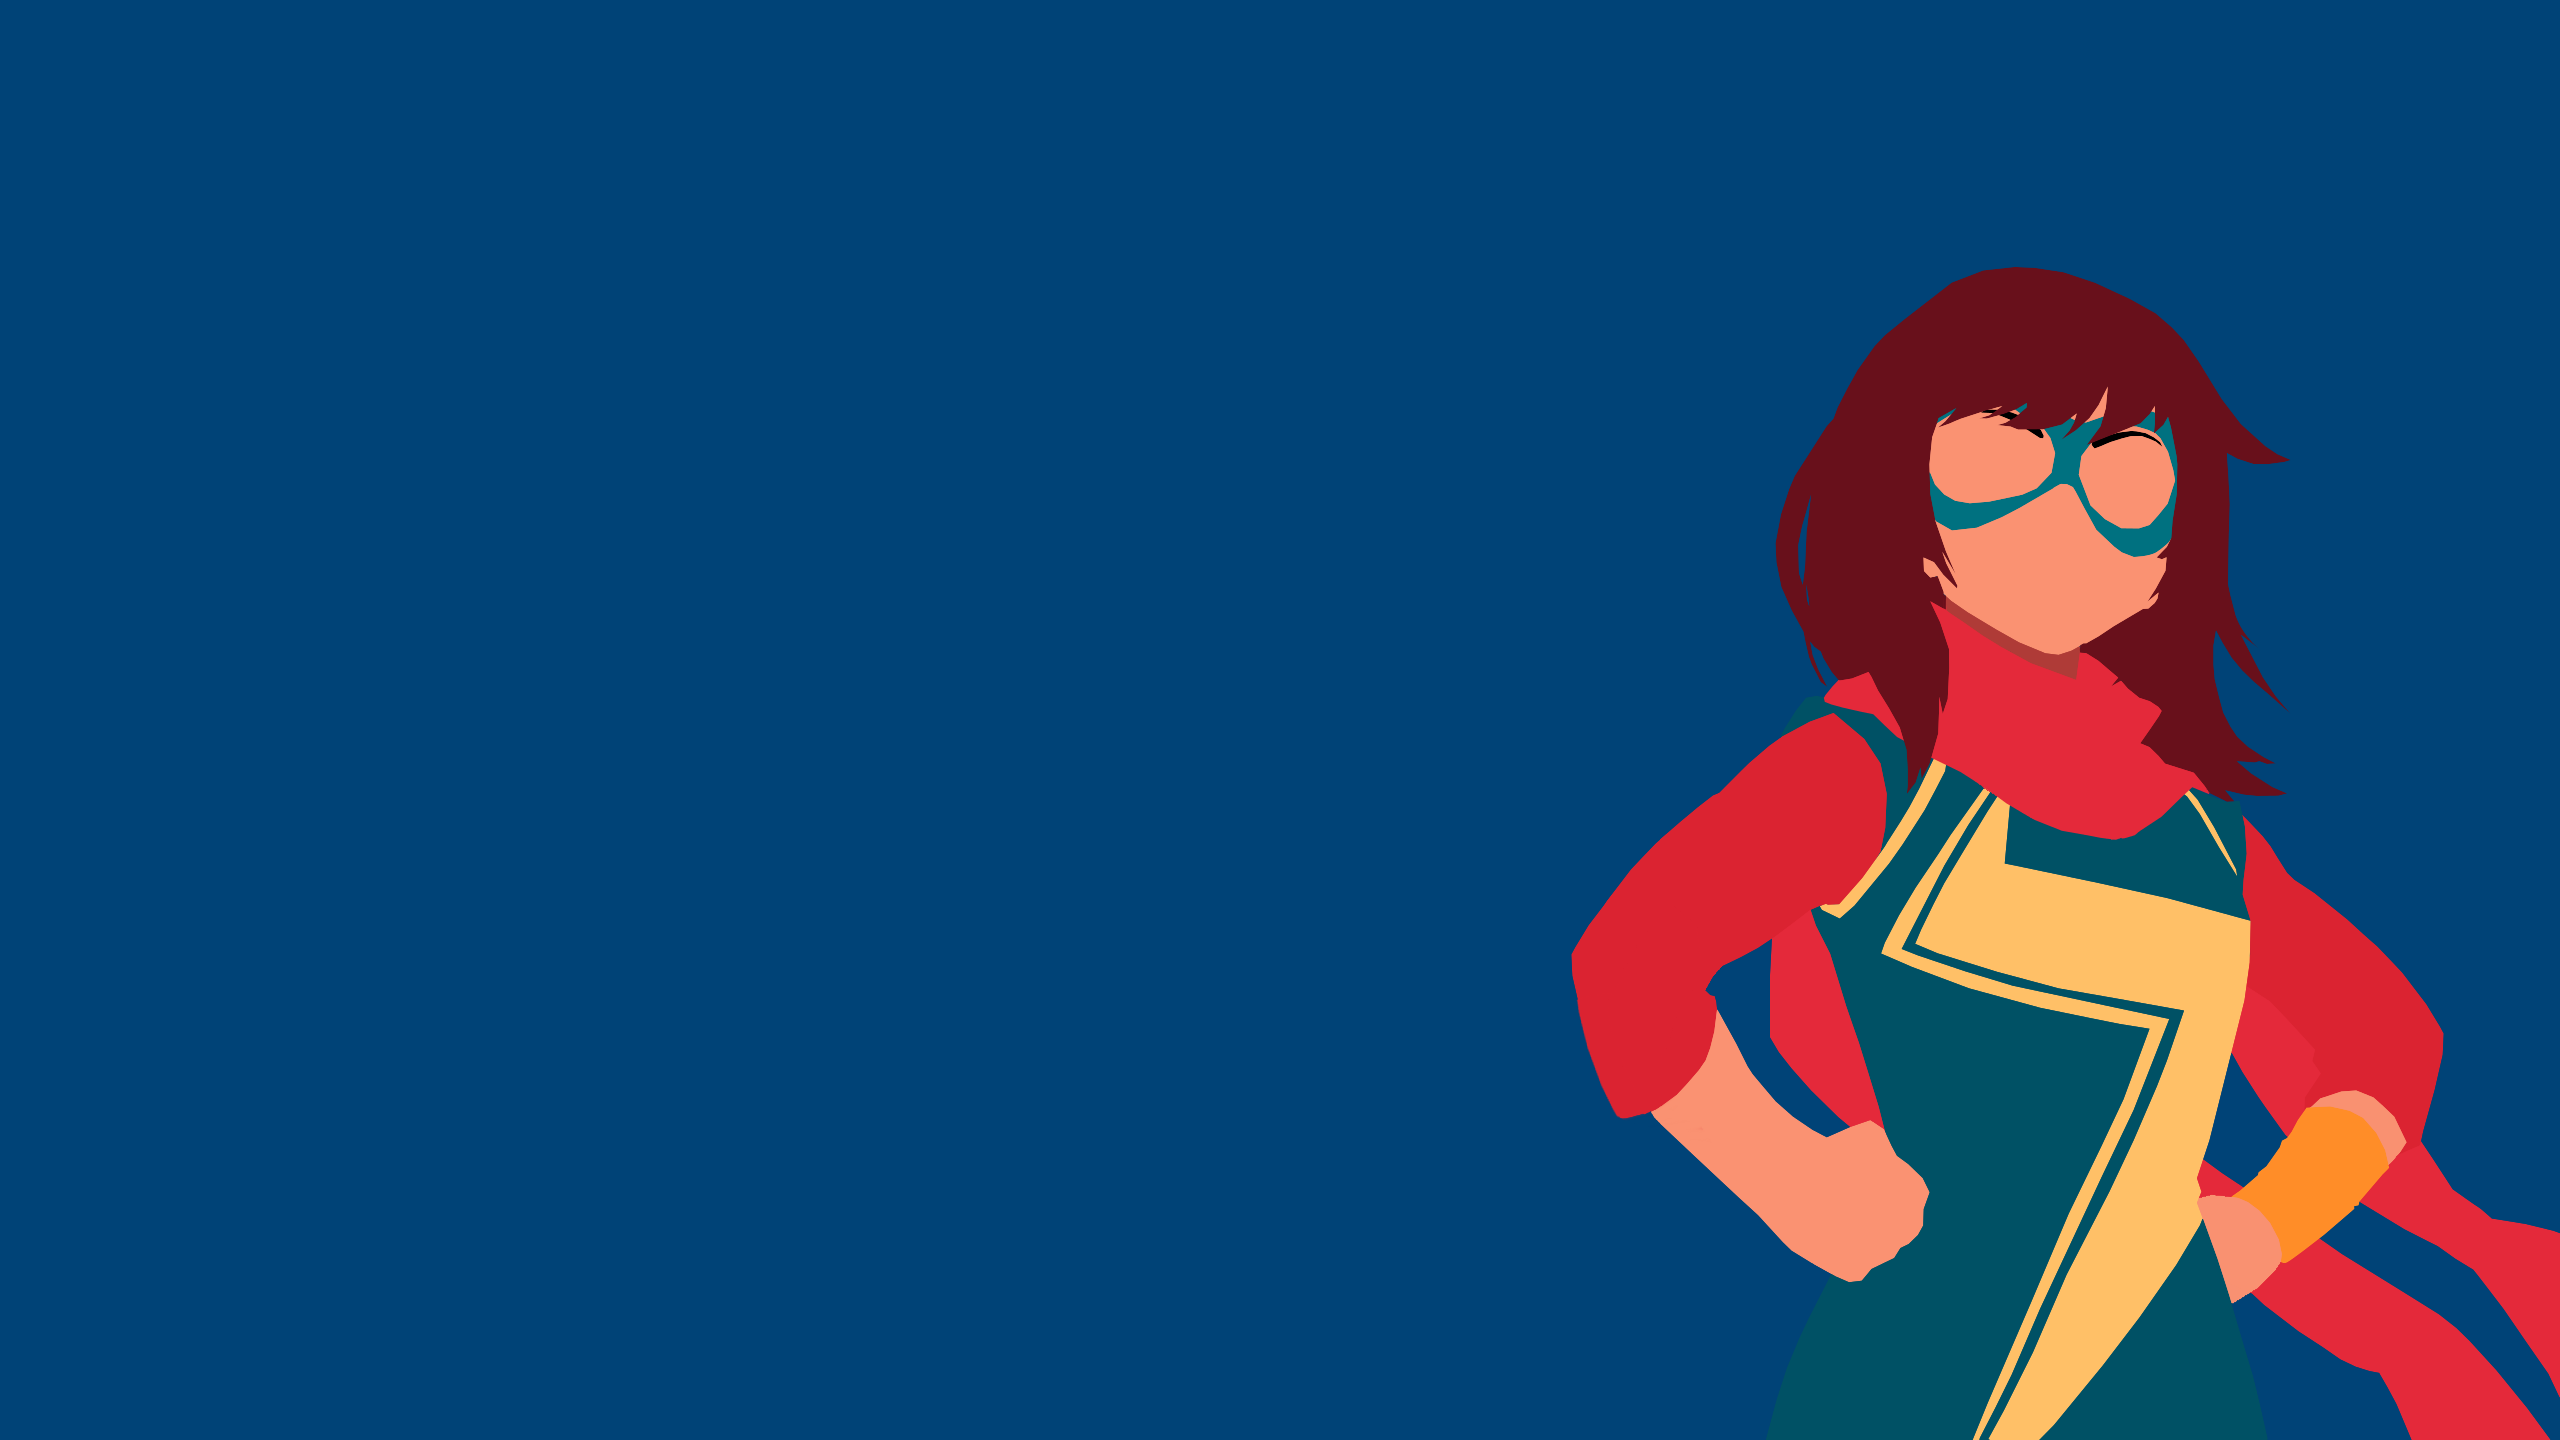 Made a minimalist style Ms. Marvel wallpaper since I couldn't find one that I liked. (1440p)